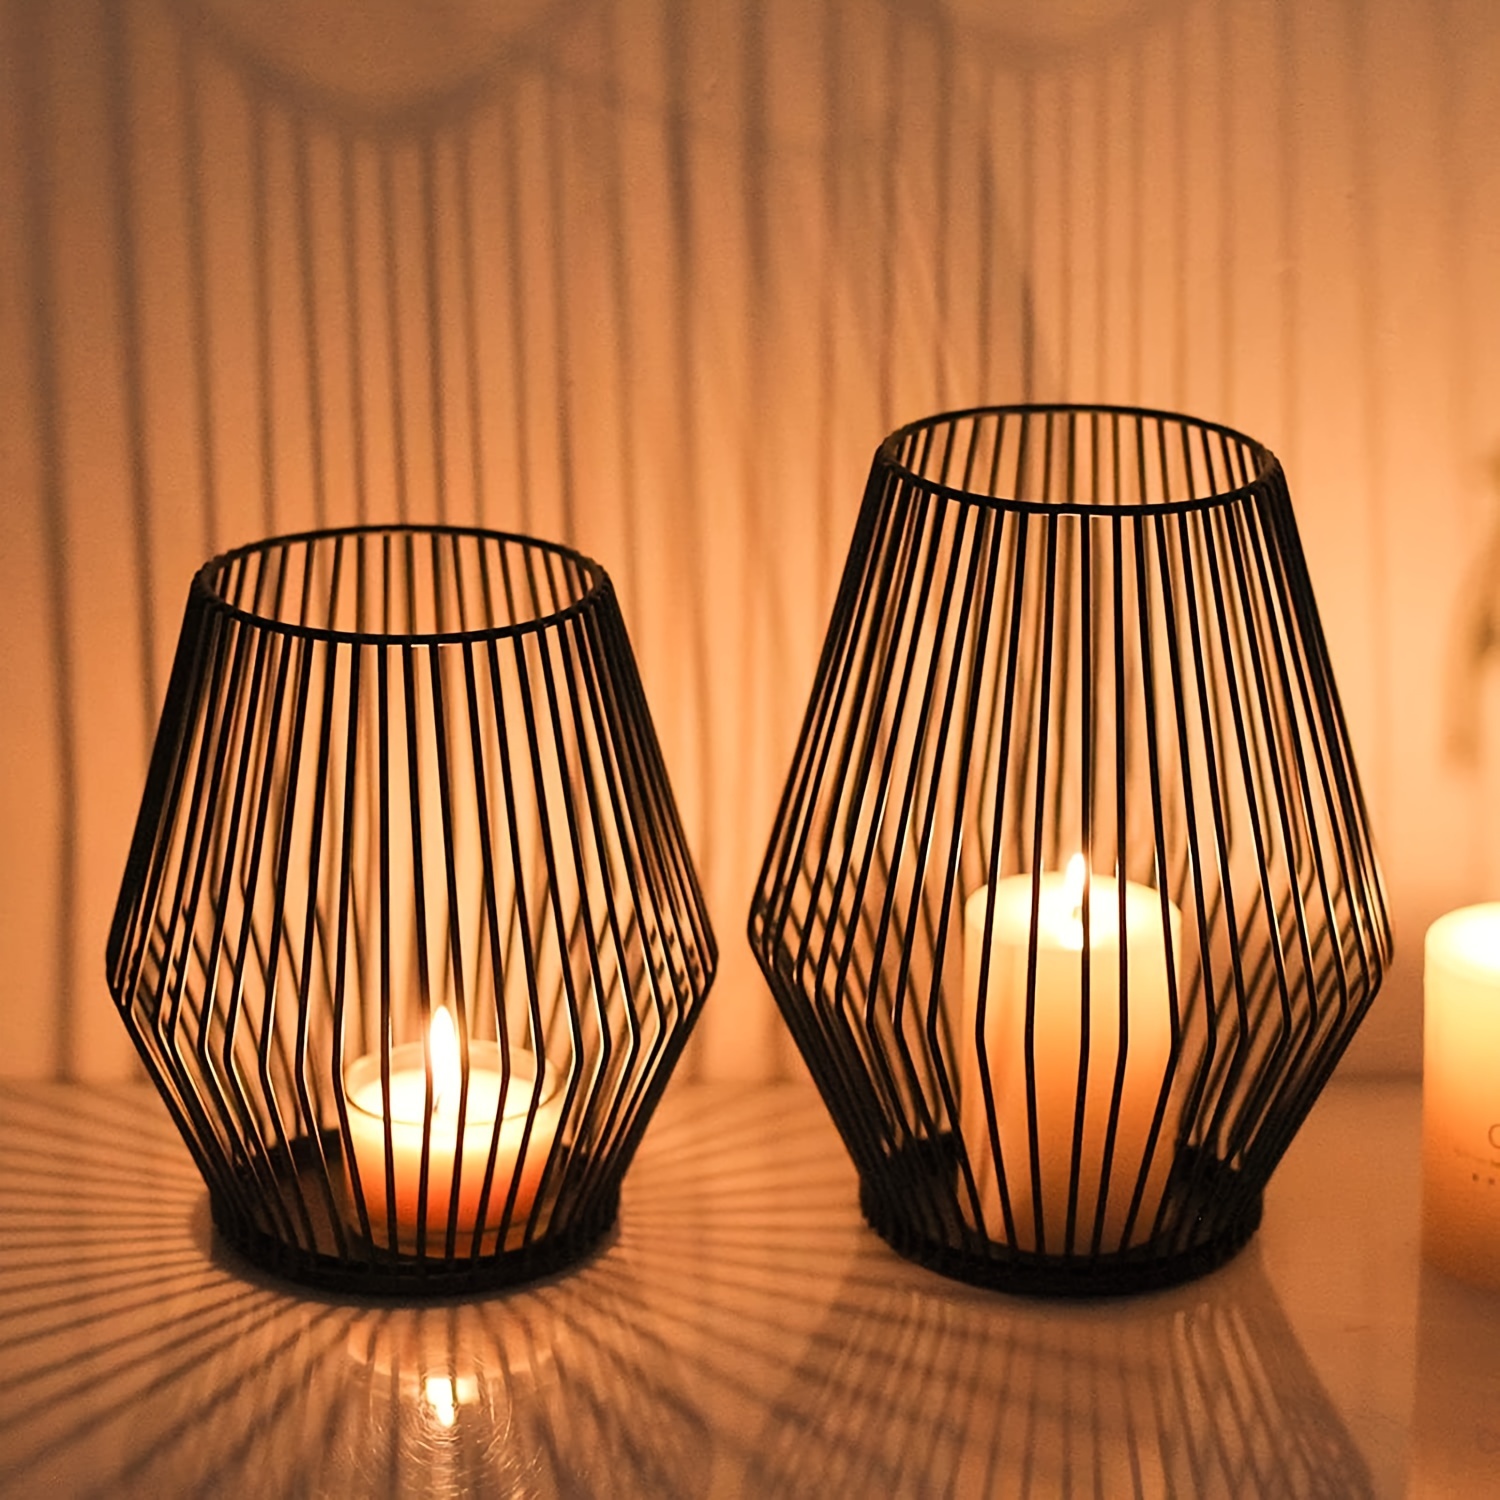 

2pcs, Candle Holder, Matte Black Metal Wire Candle Holders, Vintage Decorative Candle Stand For Indoor Outdoor Events,parties And Wedding Decorations